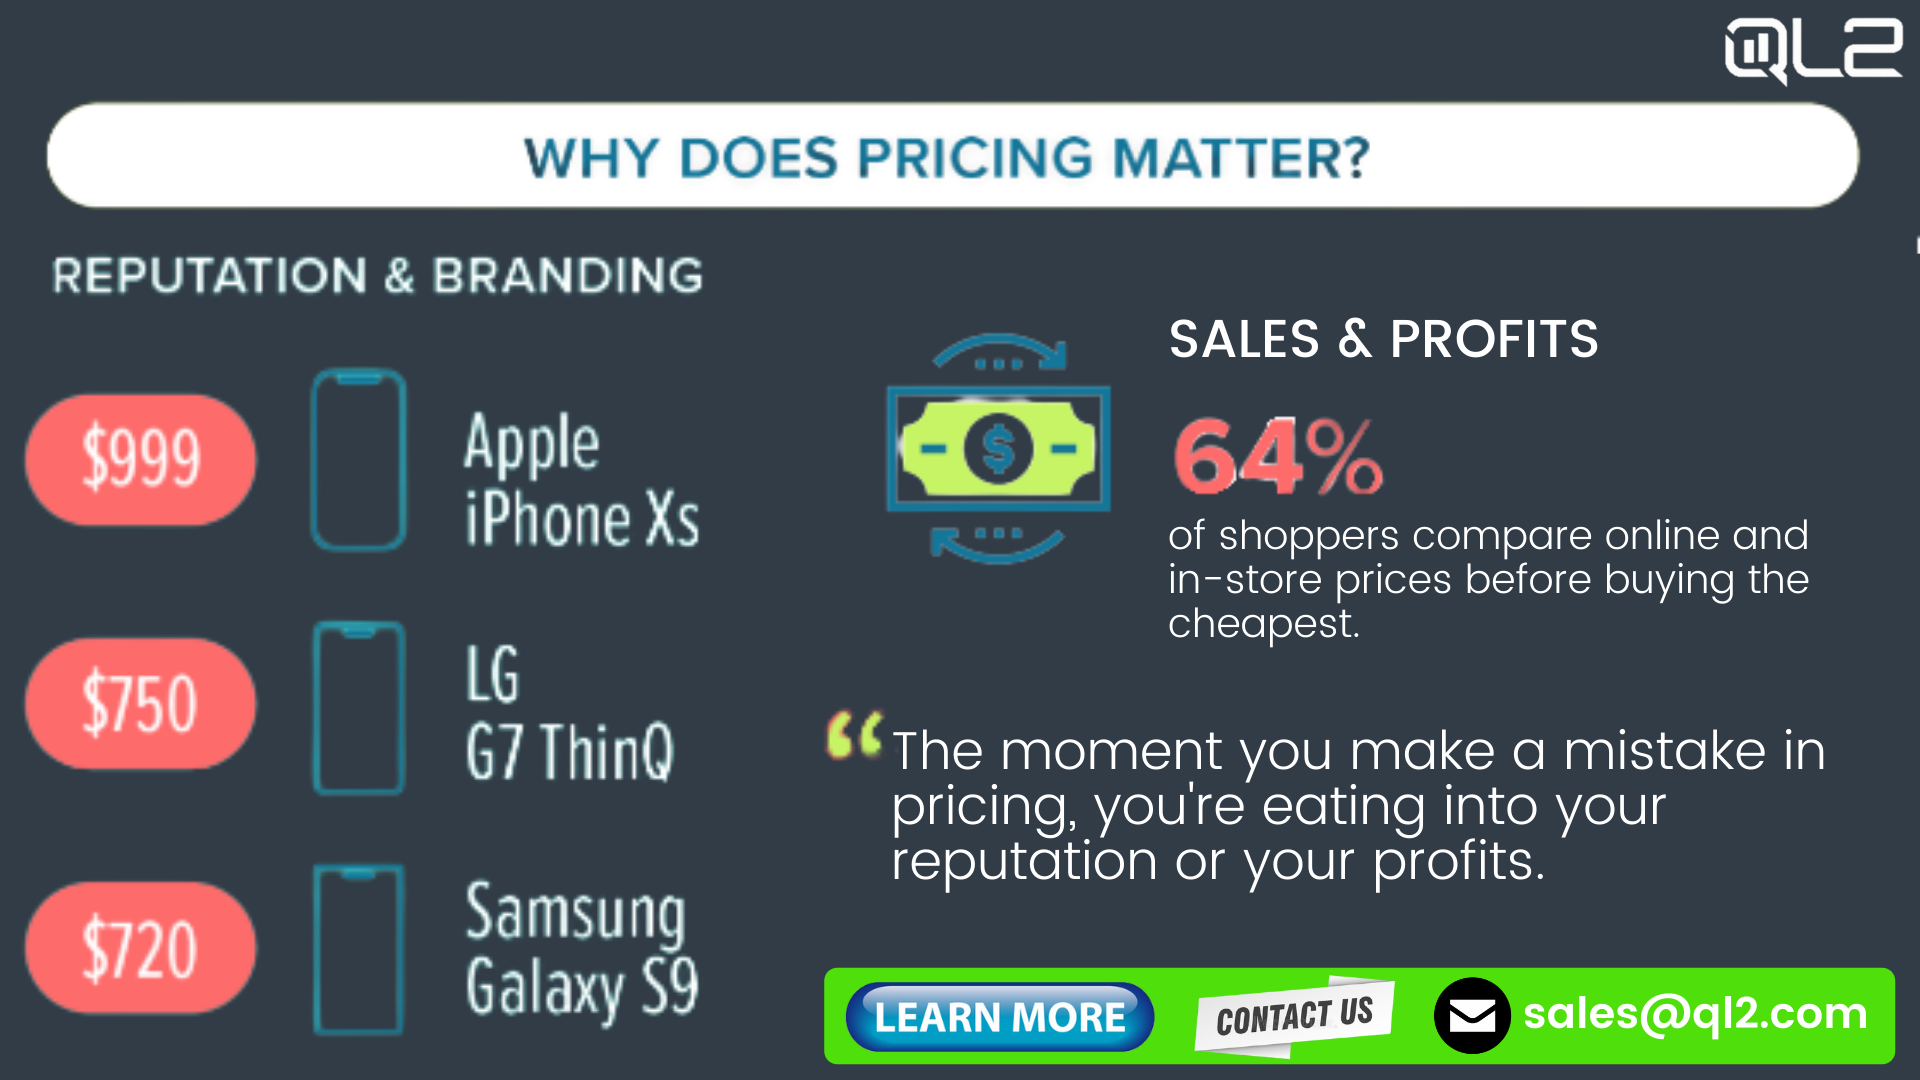 Reputation and branding, comparing Apple, LG, and Samsung phones. Sales and Profit. The moment you make a mistake in pricing, you're eating into your reputation or your profits.